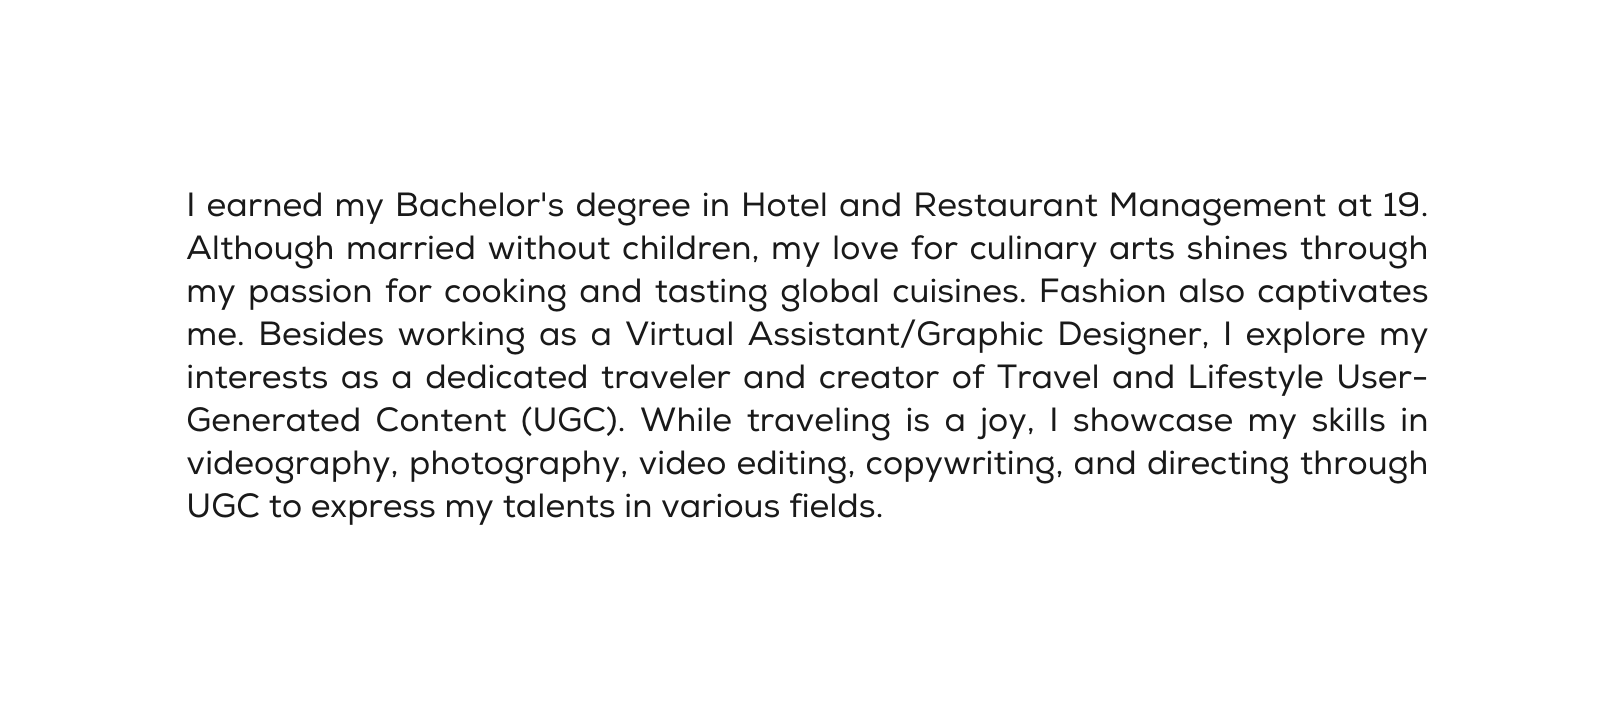 I earned my Bachelor s degree in Hotel and Restaurant Management at 19 Although married without children my love for culinary arts shines through my passion for cooking and tasting global cuisines Fashion also captivates me Besides working as a Virtual Assistant Graphic Designer I explore my interests as a dedicated traveler and creator of Travel and Lifestyle User Generated Content UGC While traveling is a joy I showcase my skills in videography photography video editing copywriting and directing through UGC to express my talents in various fields